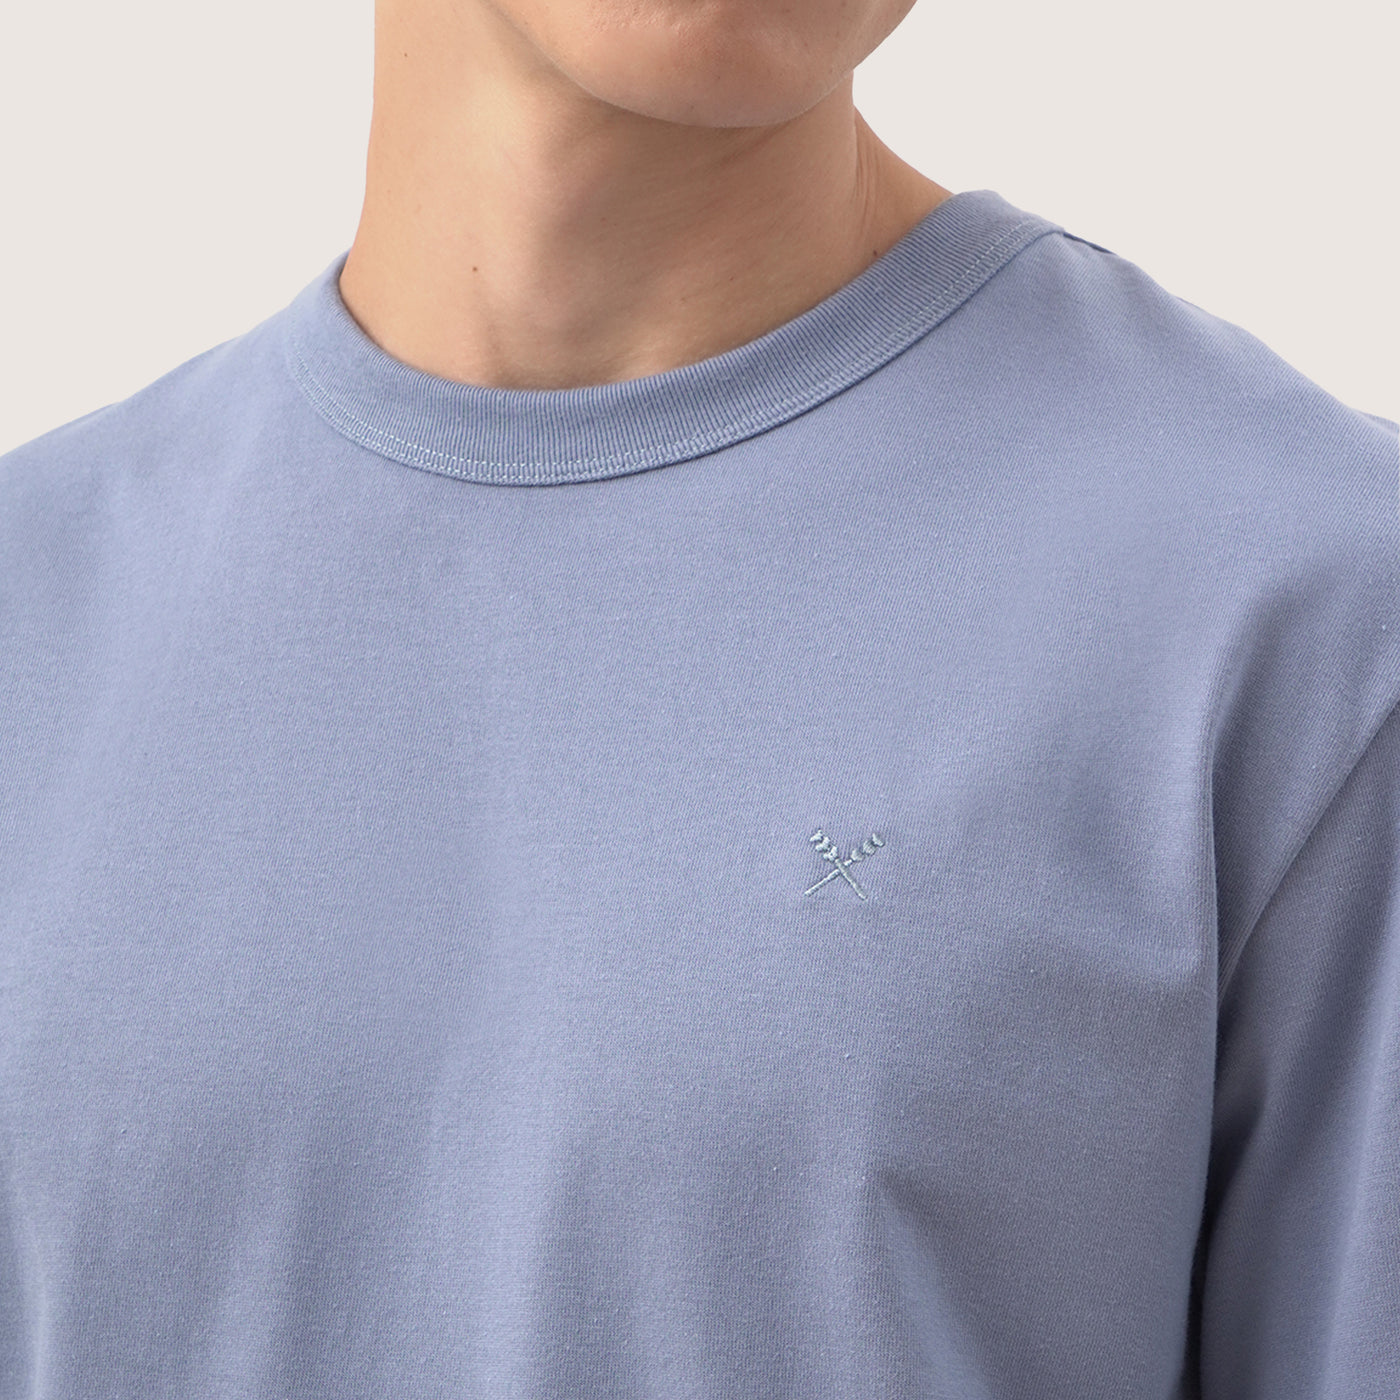 Daily Wear Relaxed Fit Crew Neck T-Shirt